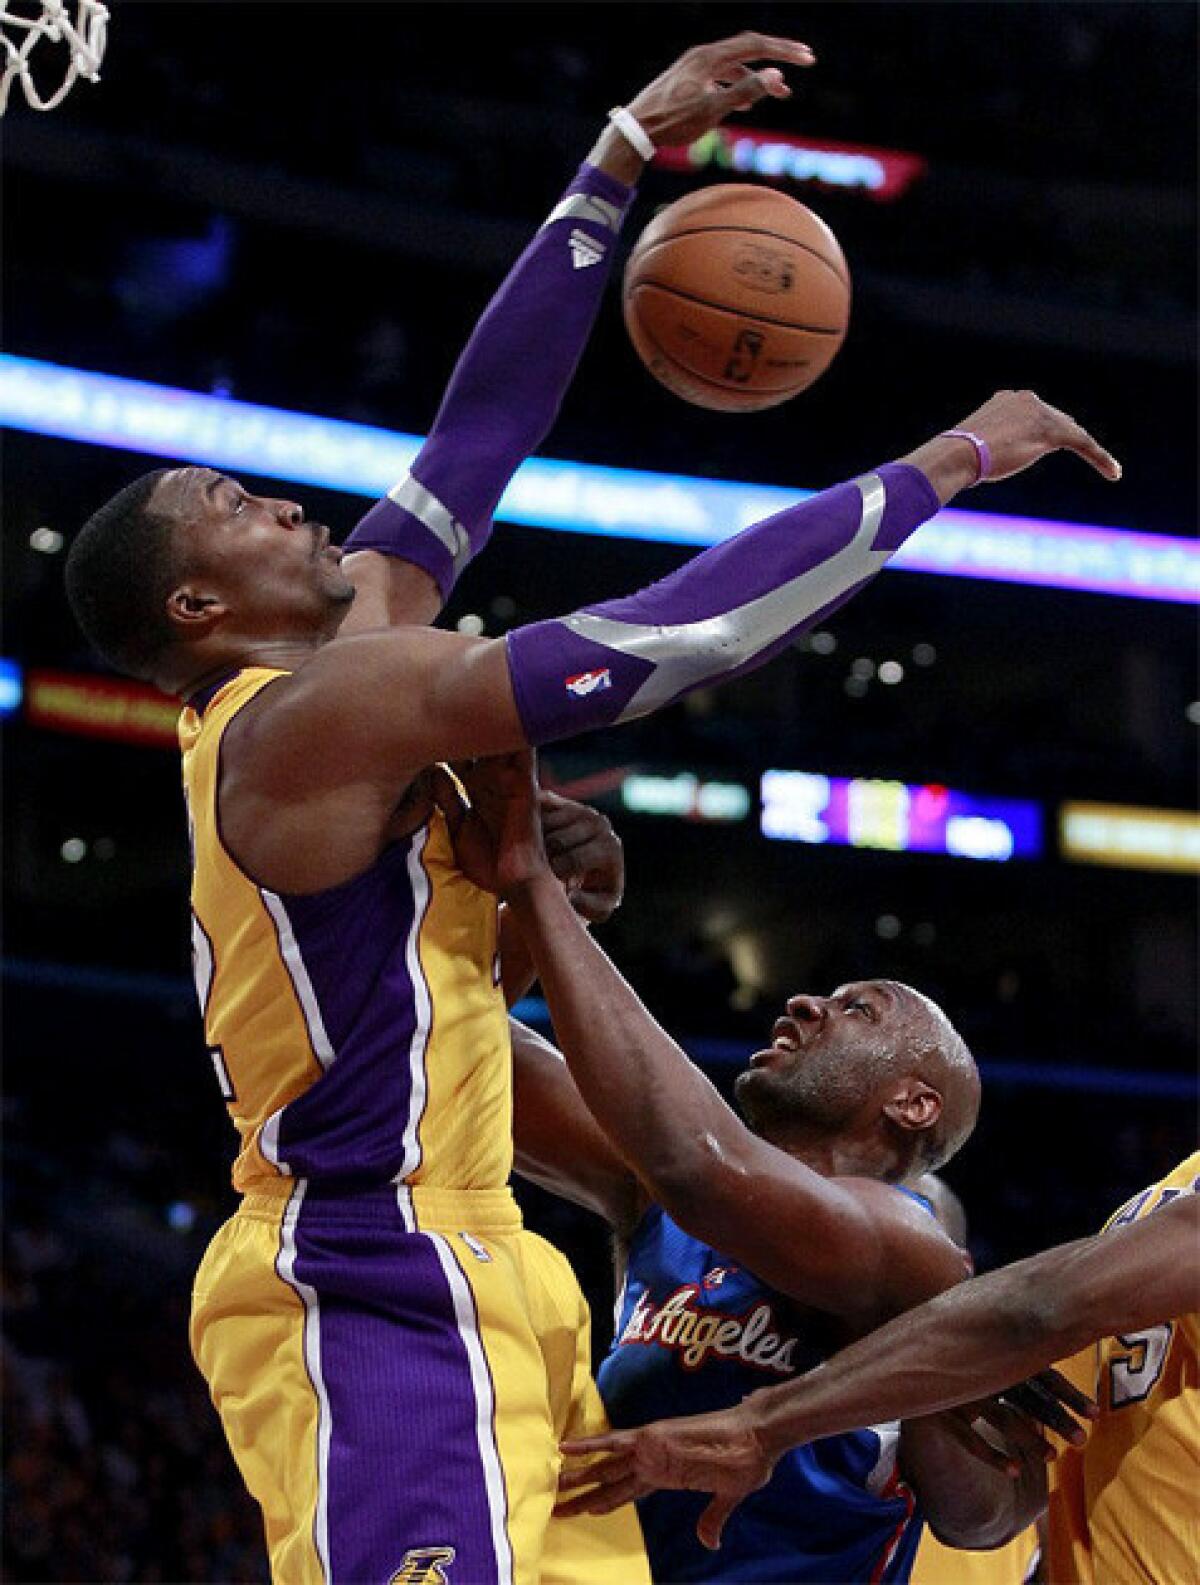 The Lakers' Dwight Howard blocks Lamar Odom's shot in the second half of Friday's game against the Clippers at Staples Center.